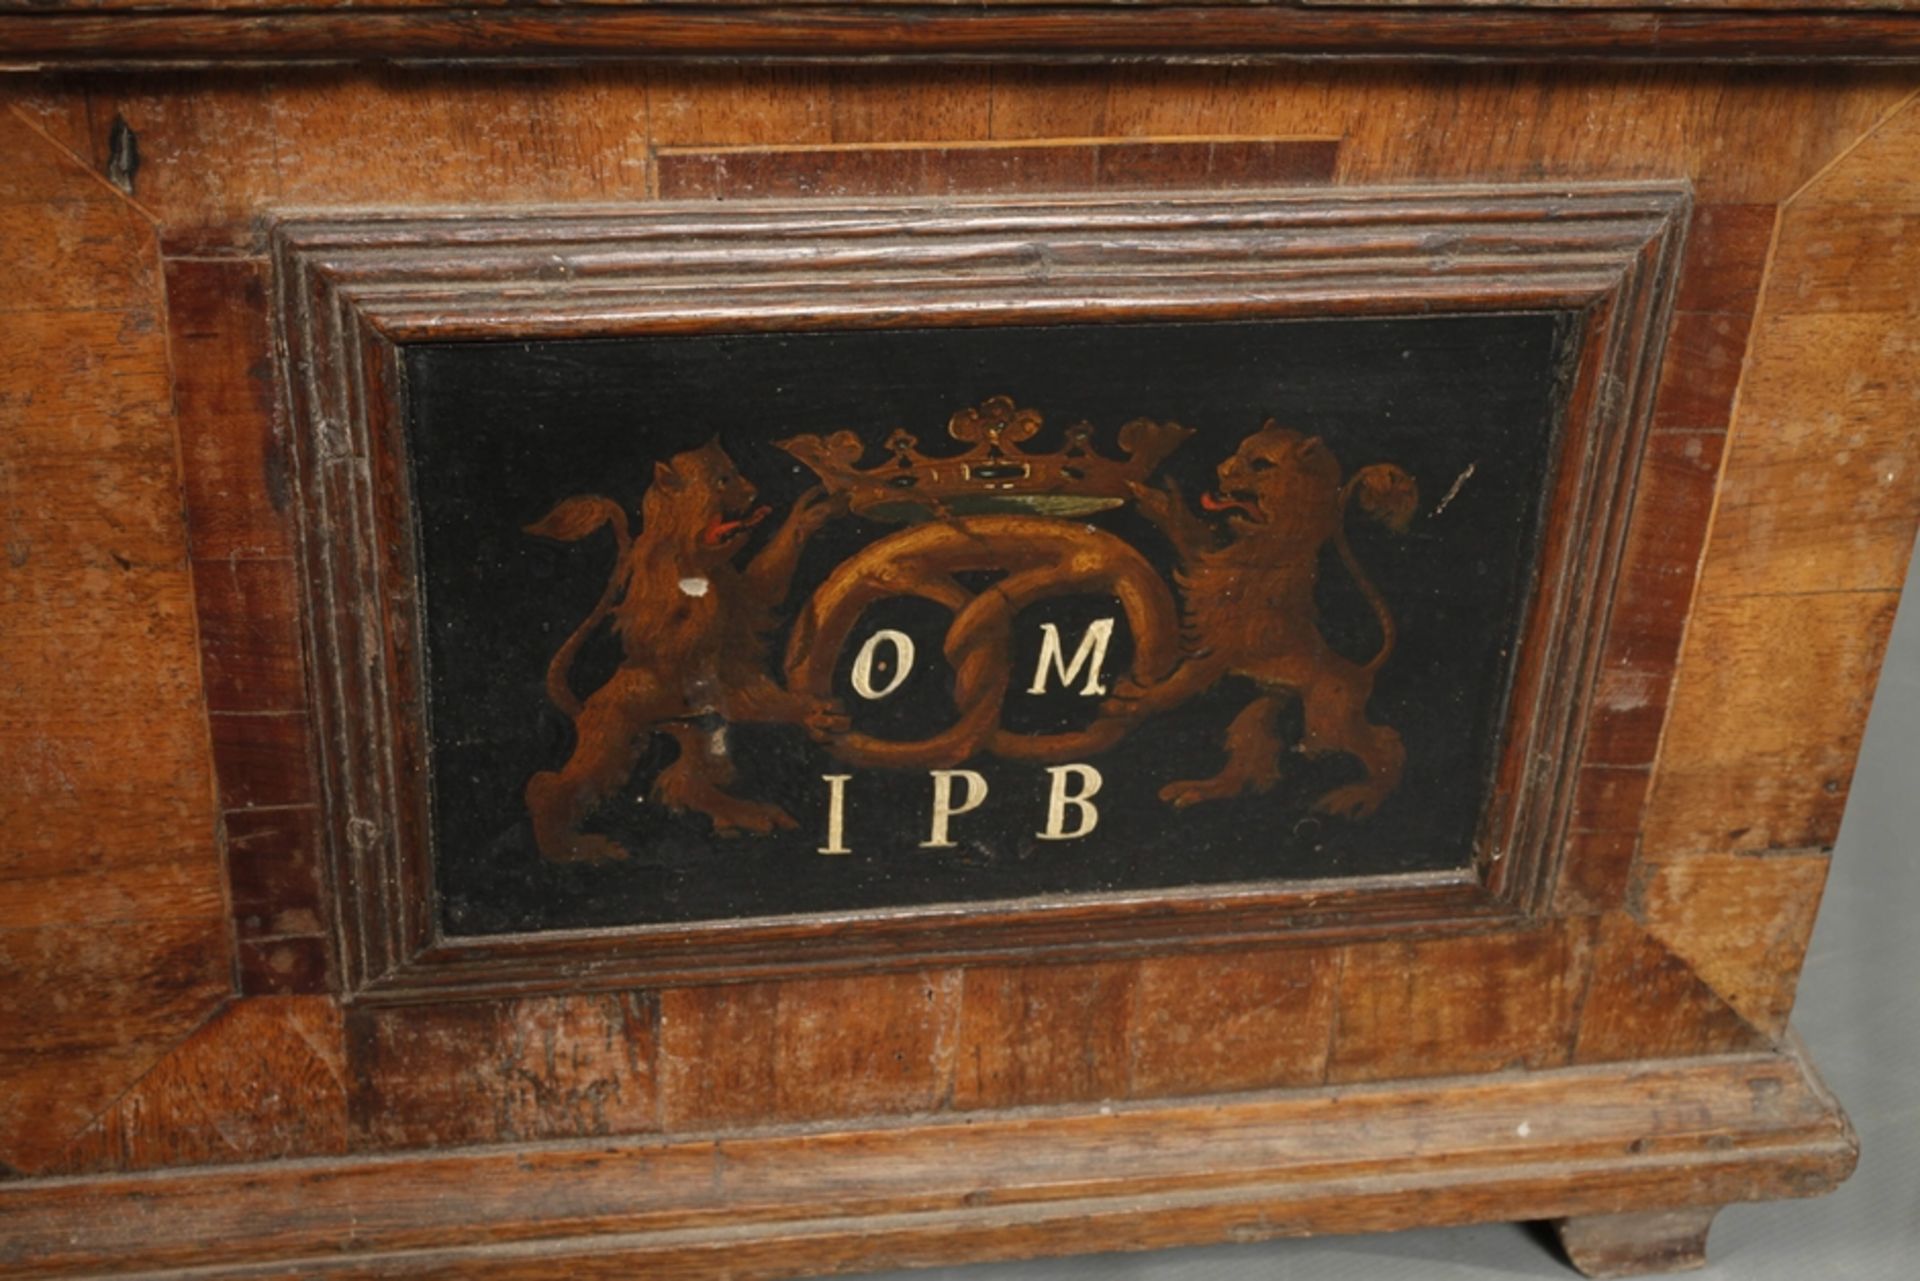 Inguild chest of the bakers' guild - Image 3 of 8